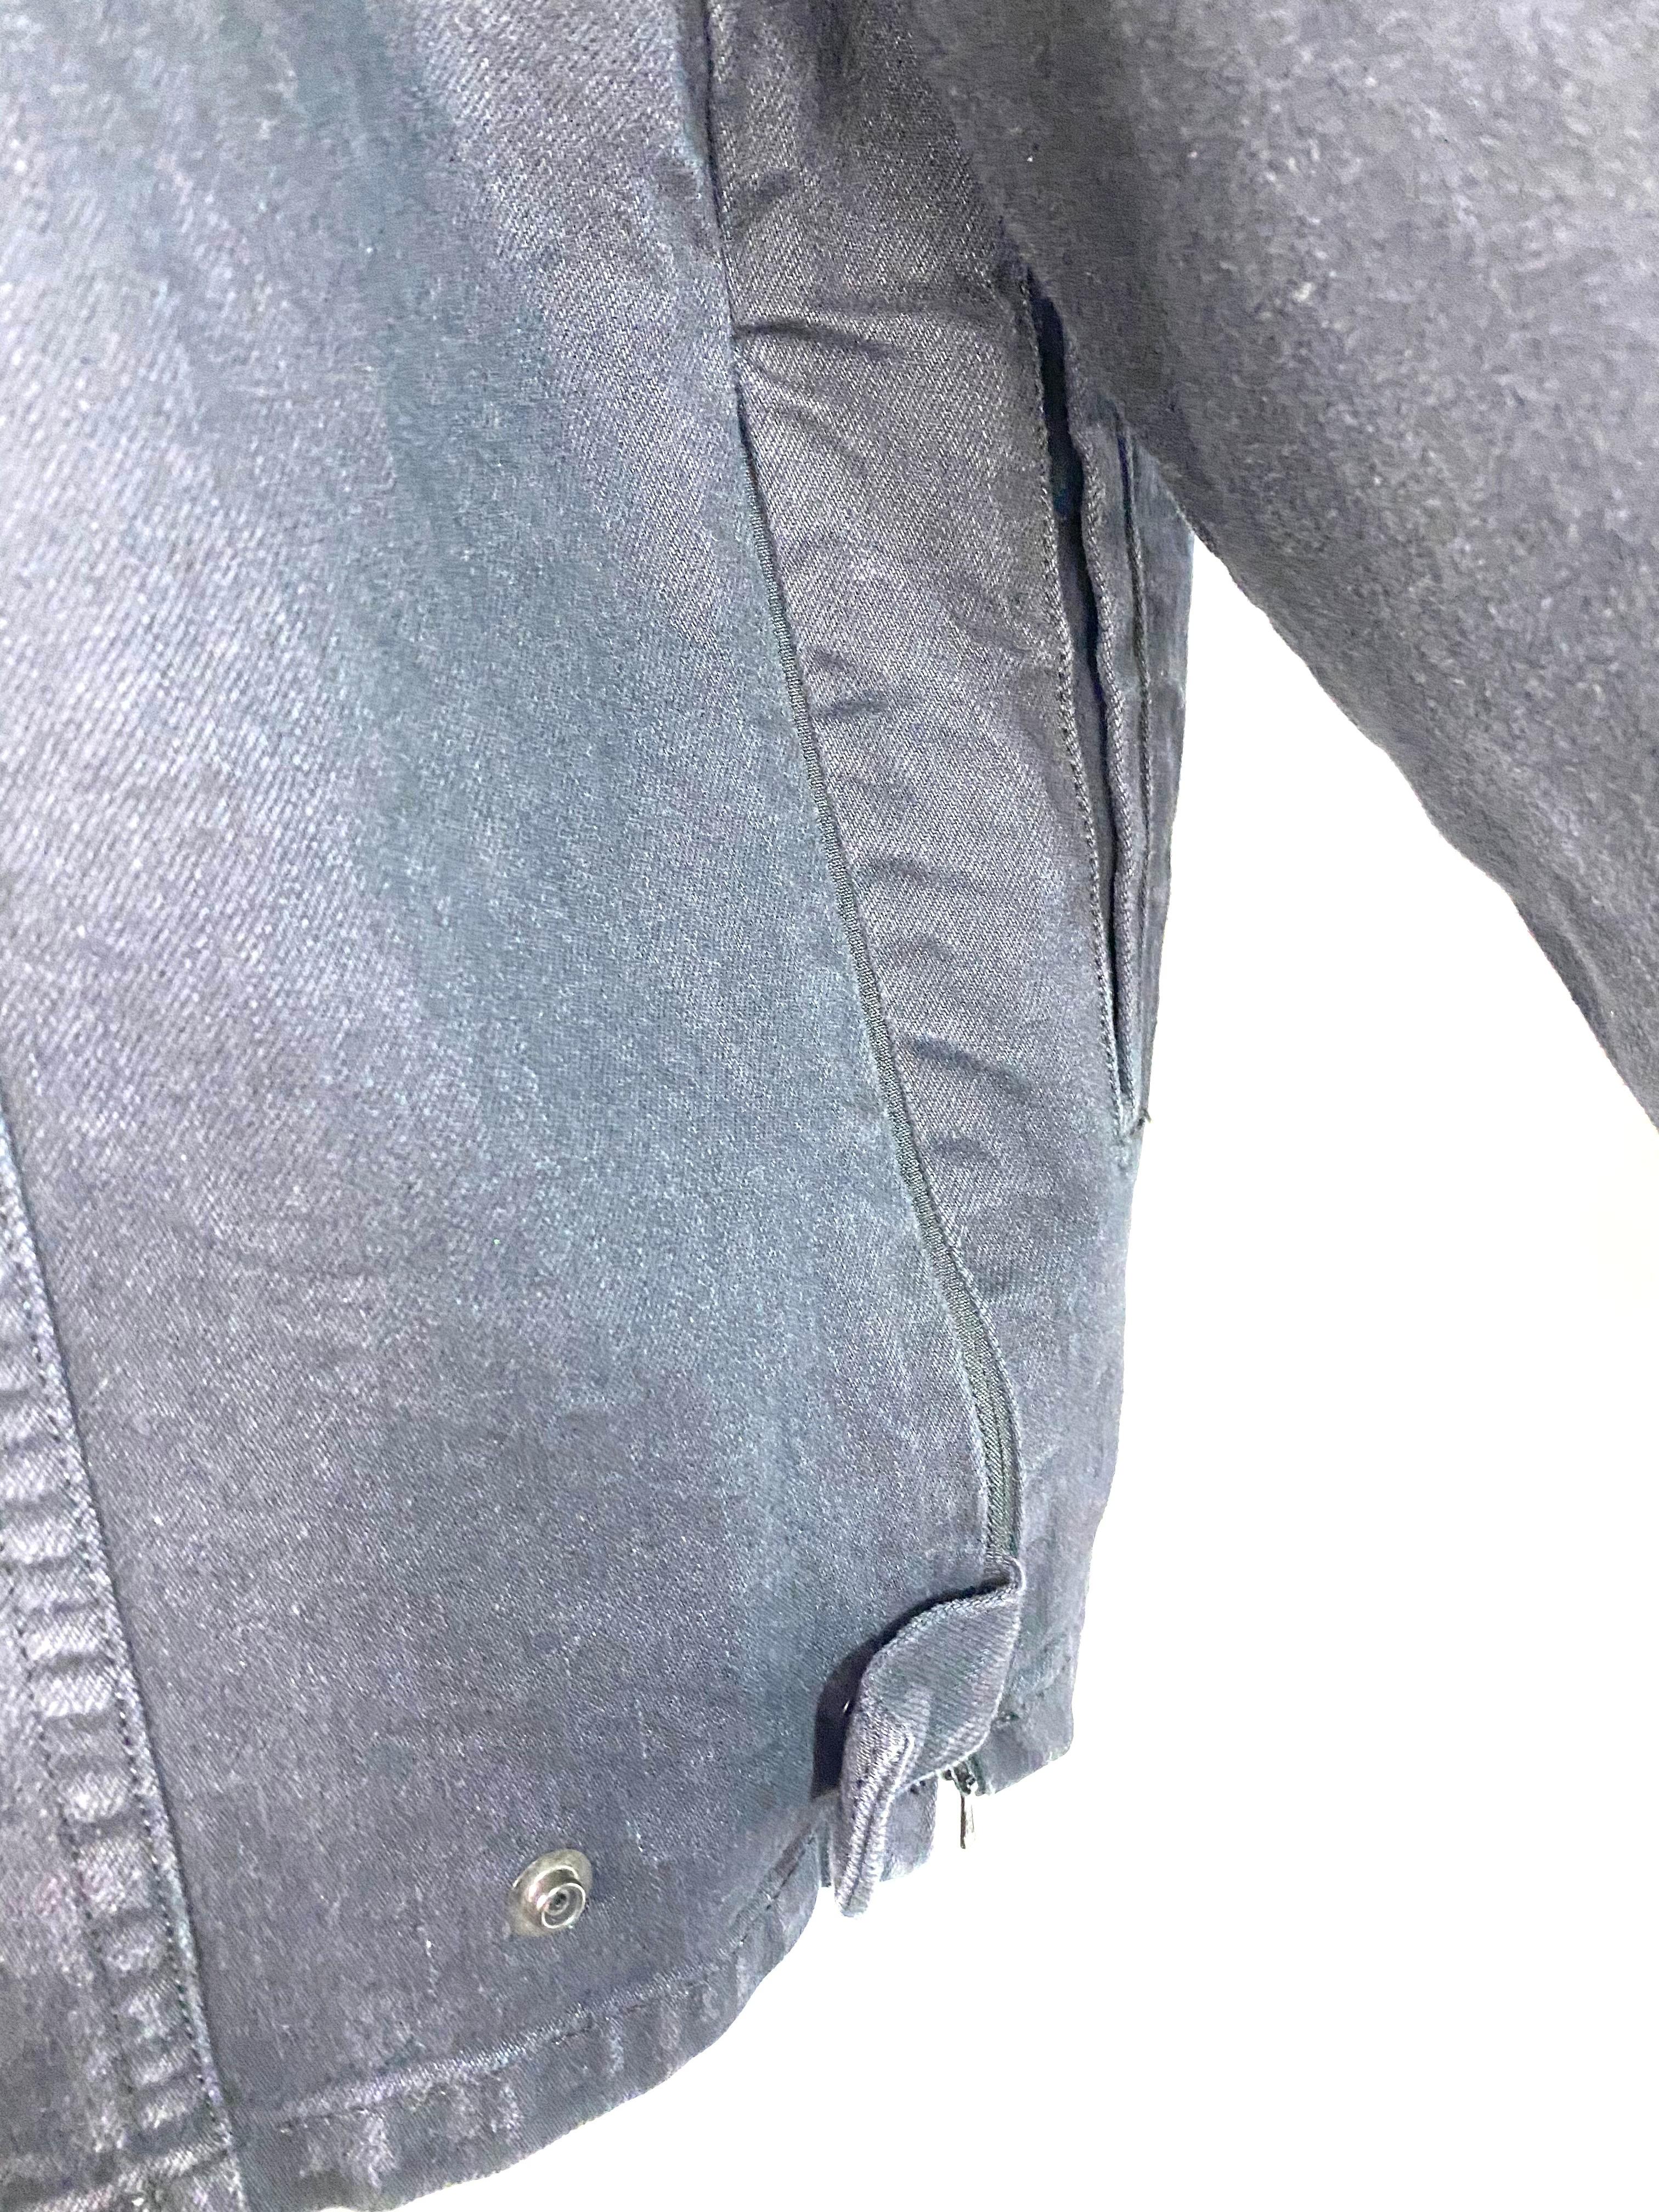 Dressedundressed Grey Denim Jacket, Size 3 In Excellent Condition For Sale In Beverly Hills, CA